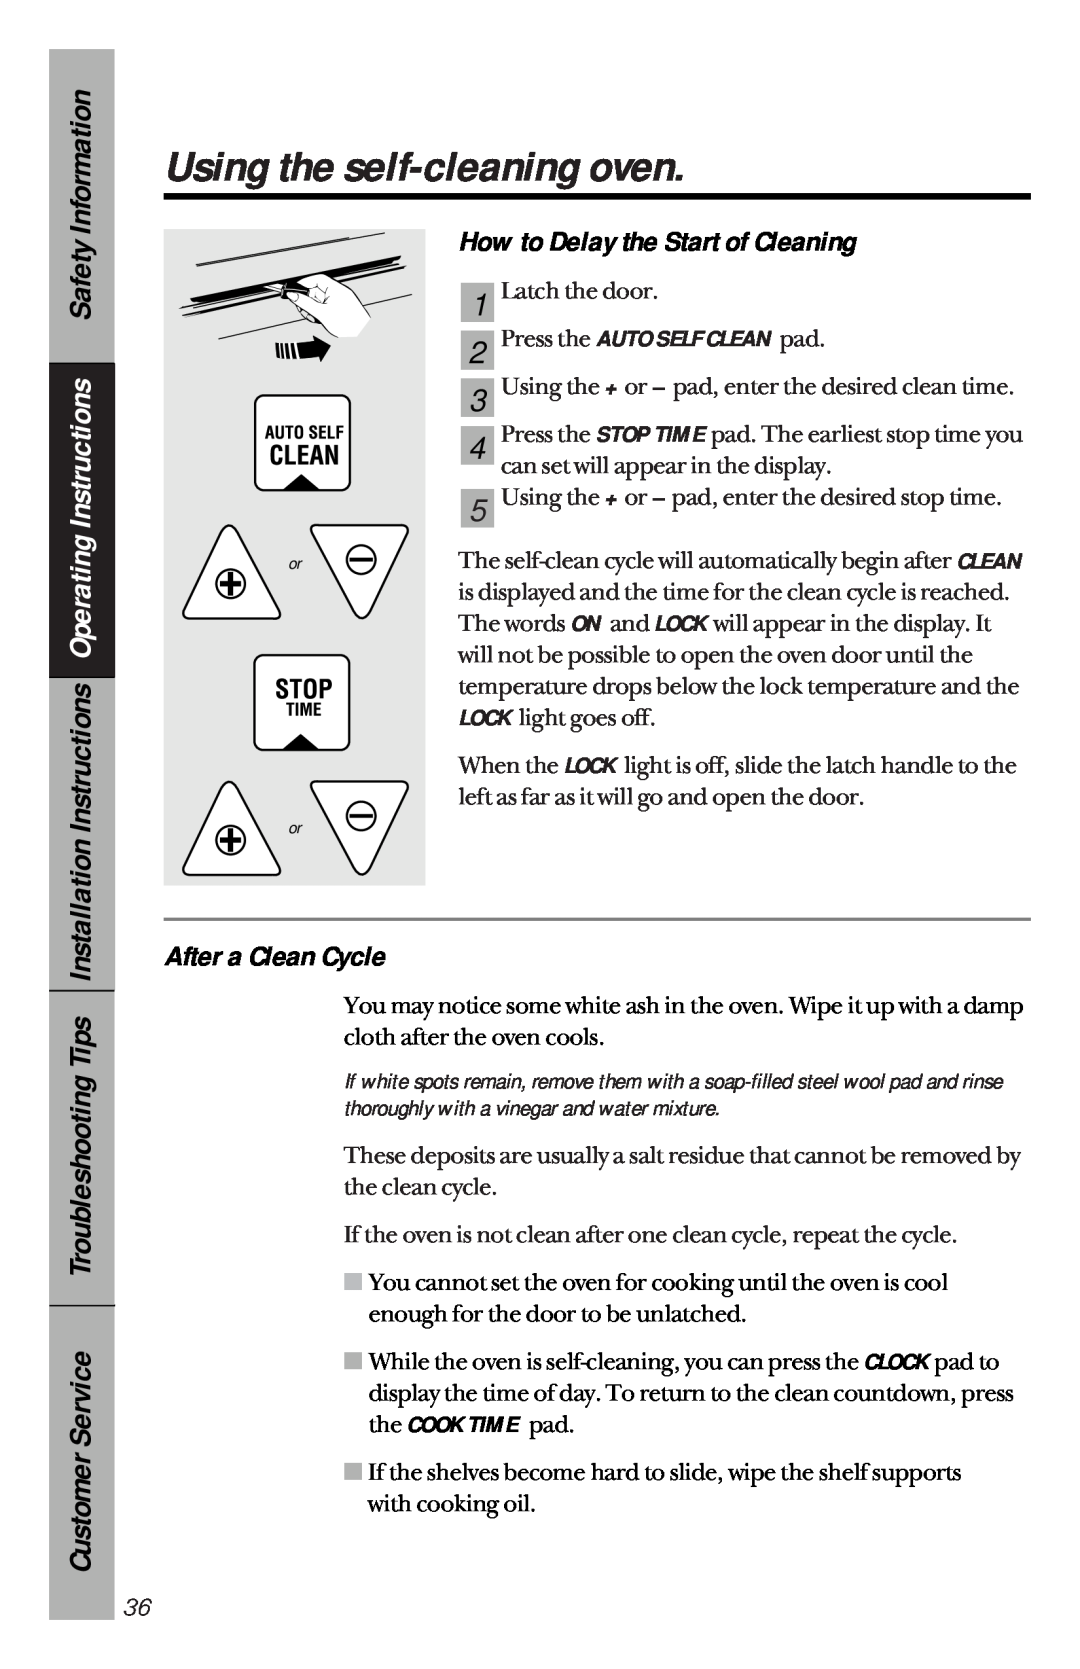 GE 49-8779, 164D3333P033 manual How to Delay the Start of Cleaning, After a Clean Cycle, Using the self-cleaning oven 